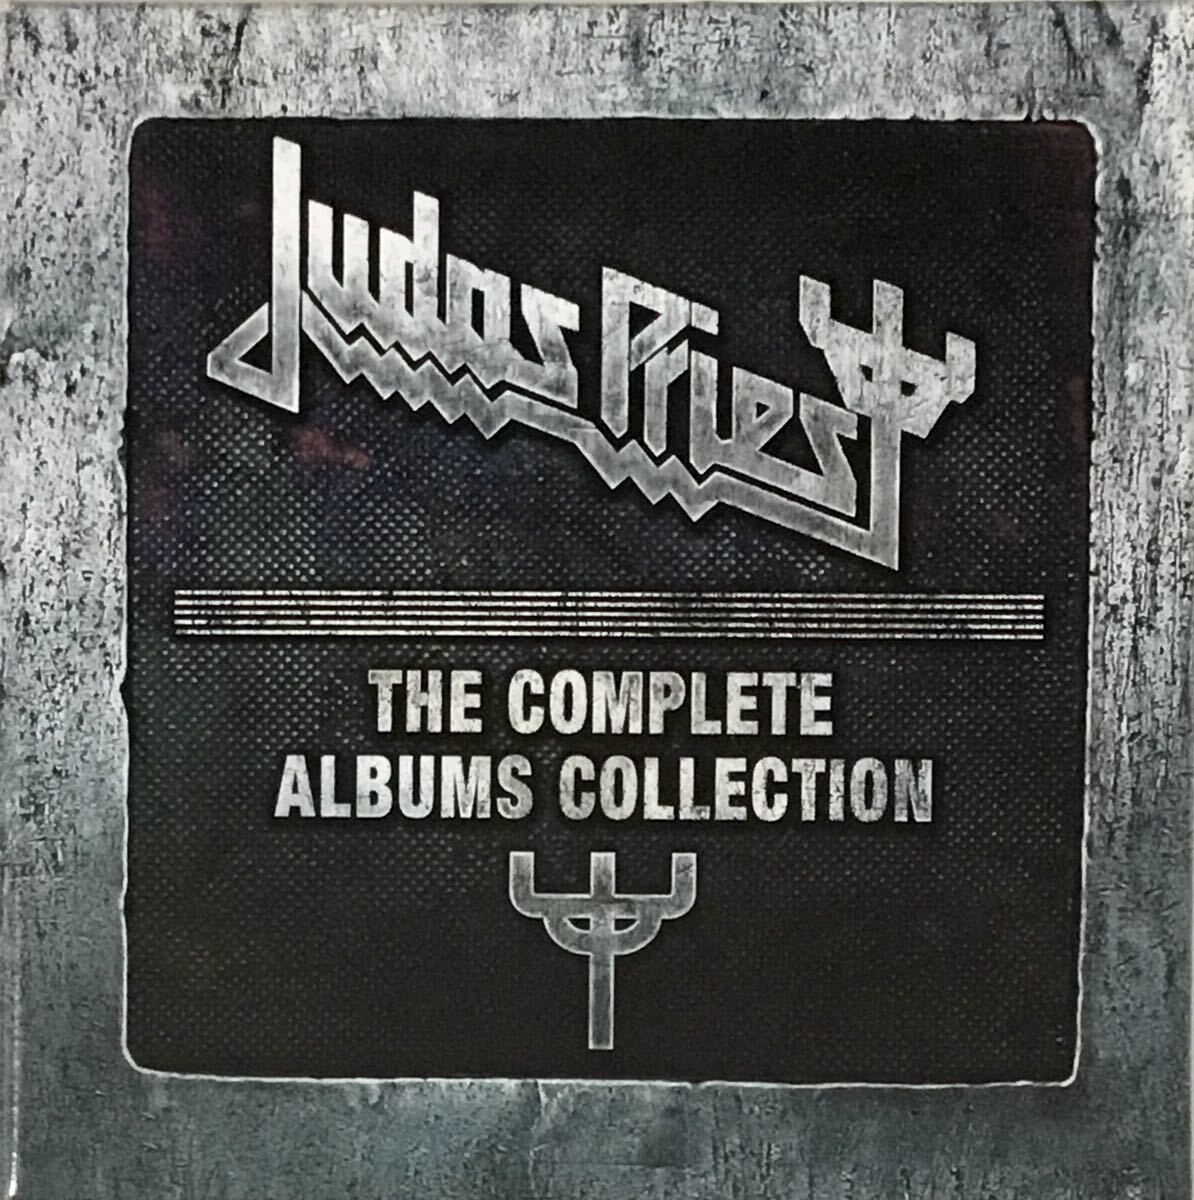 ☆ JUDAS PRIEST THE COMPLETE ALBUMS COLLECTION CD-BOX CD19枚組 輸入盤_画像1